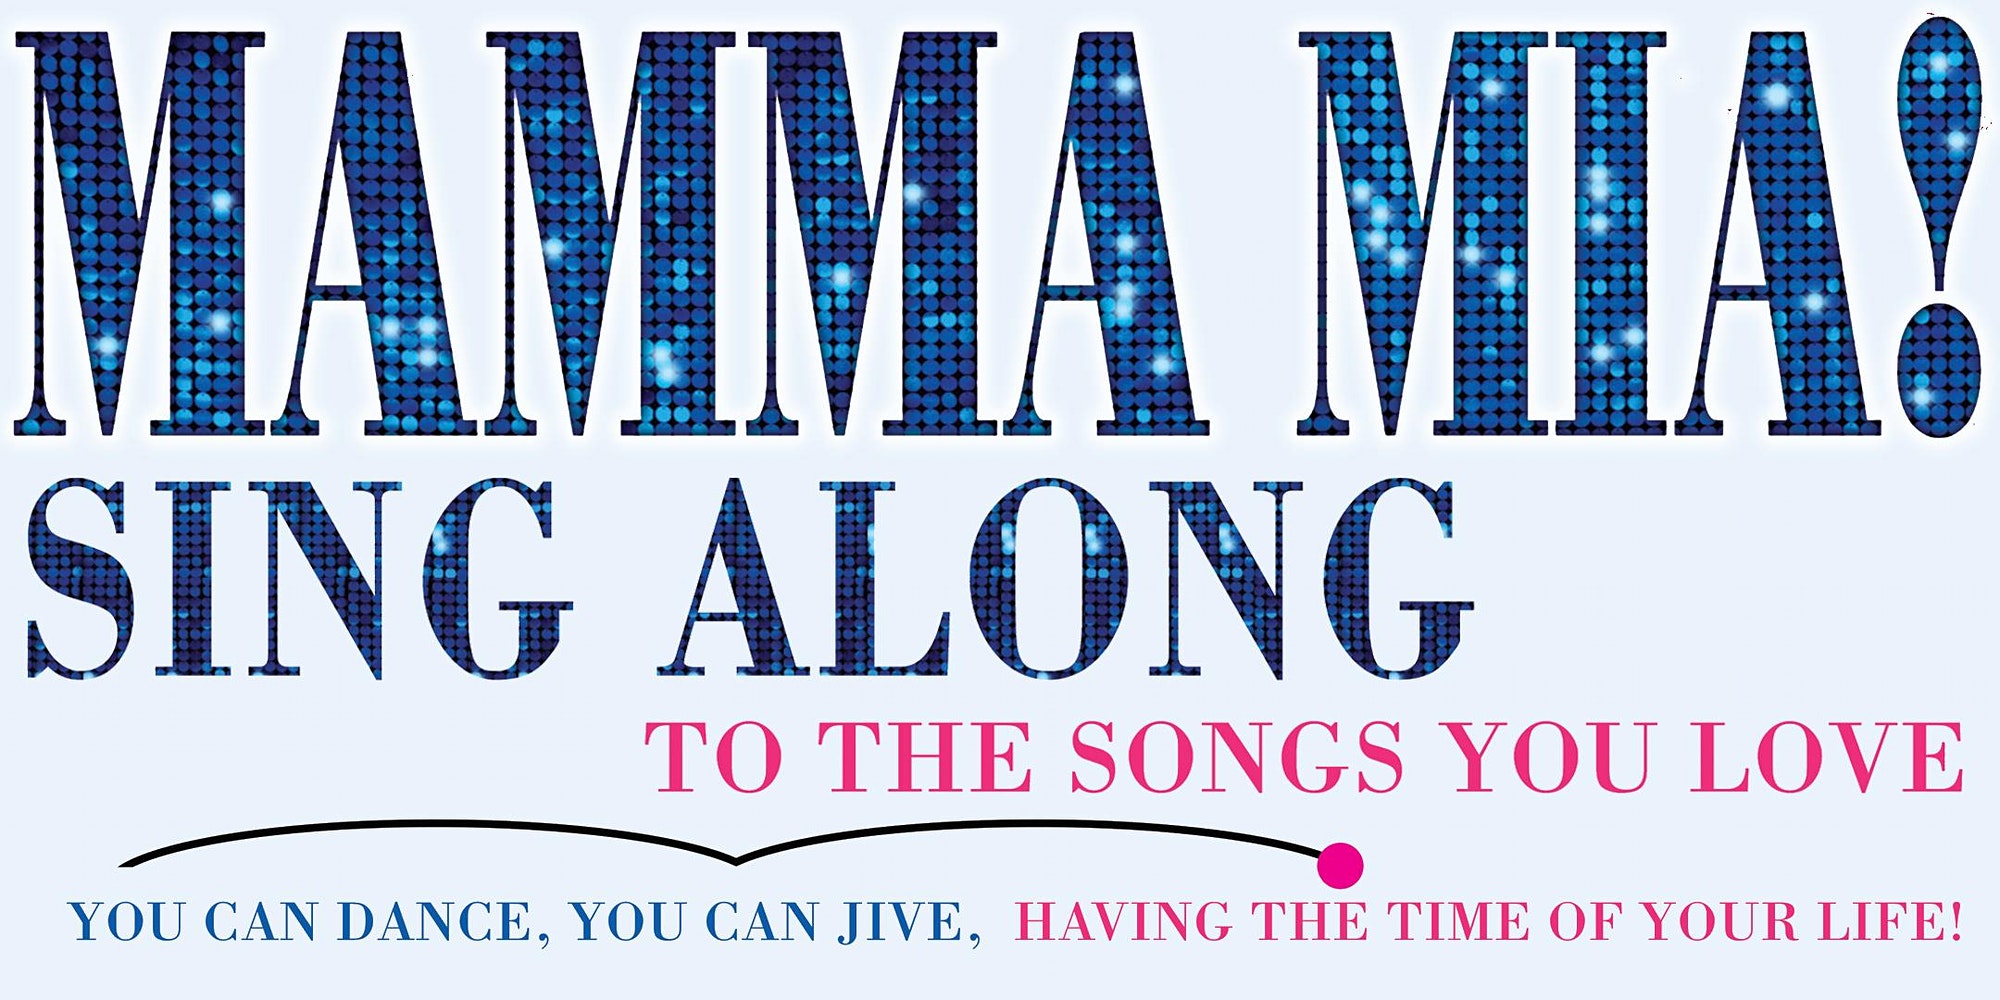 Sing Along with MAMMA MIA! @ The Abbey | Park Ave Magazine